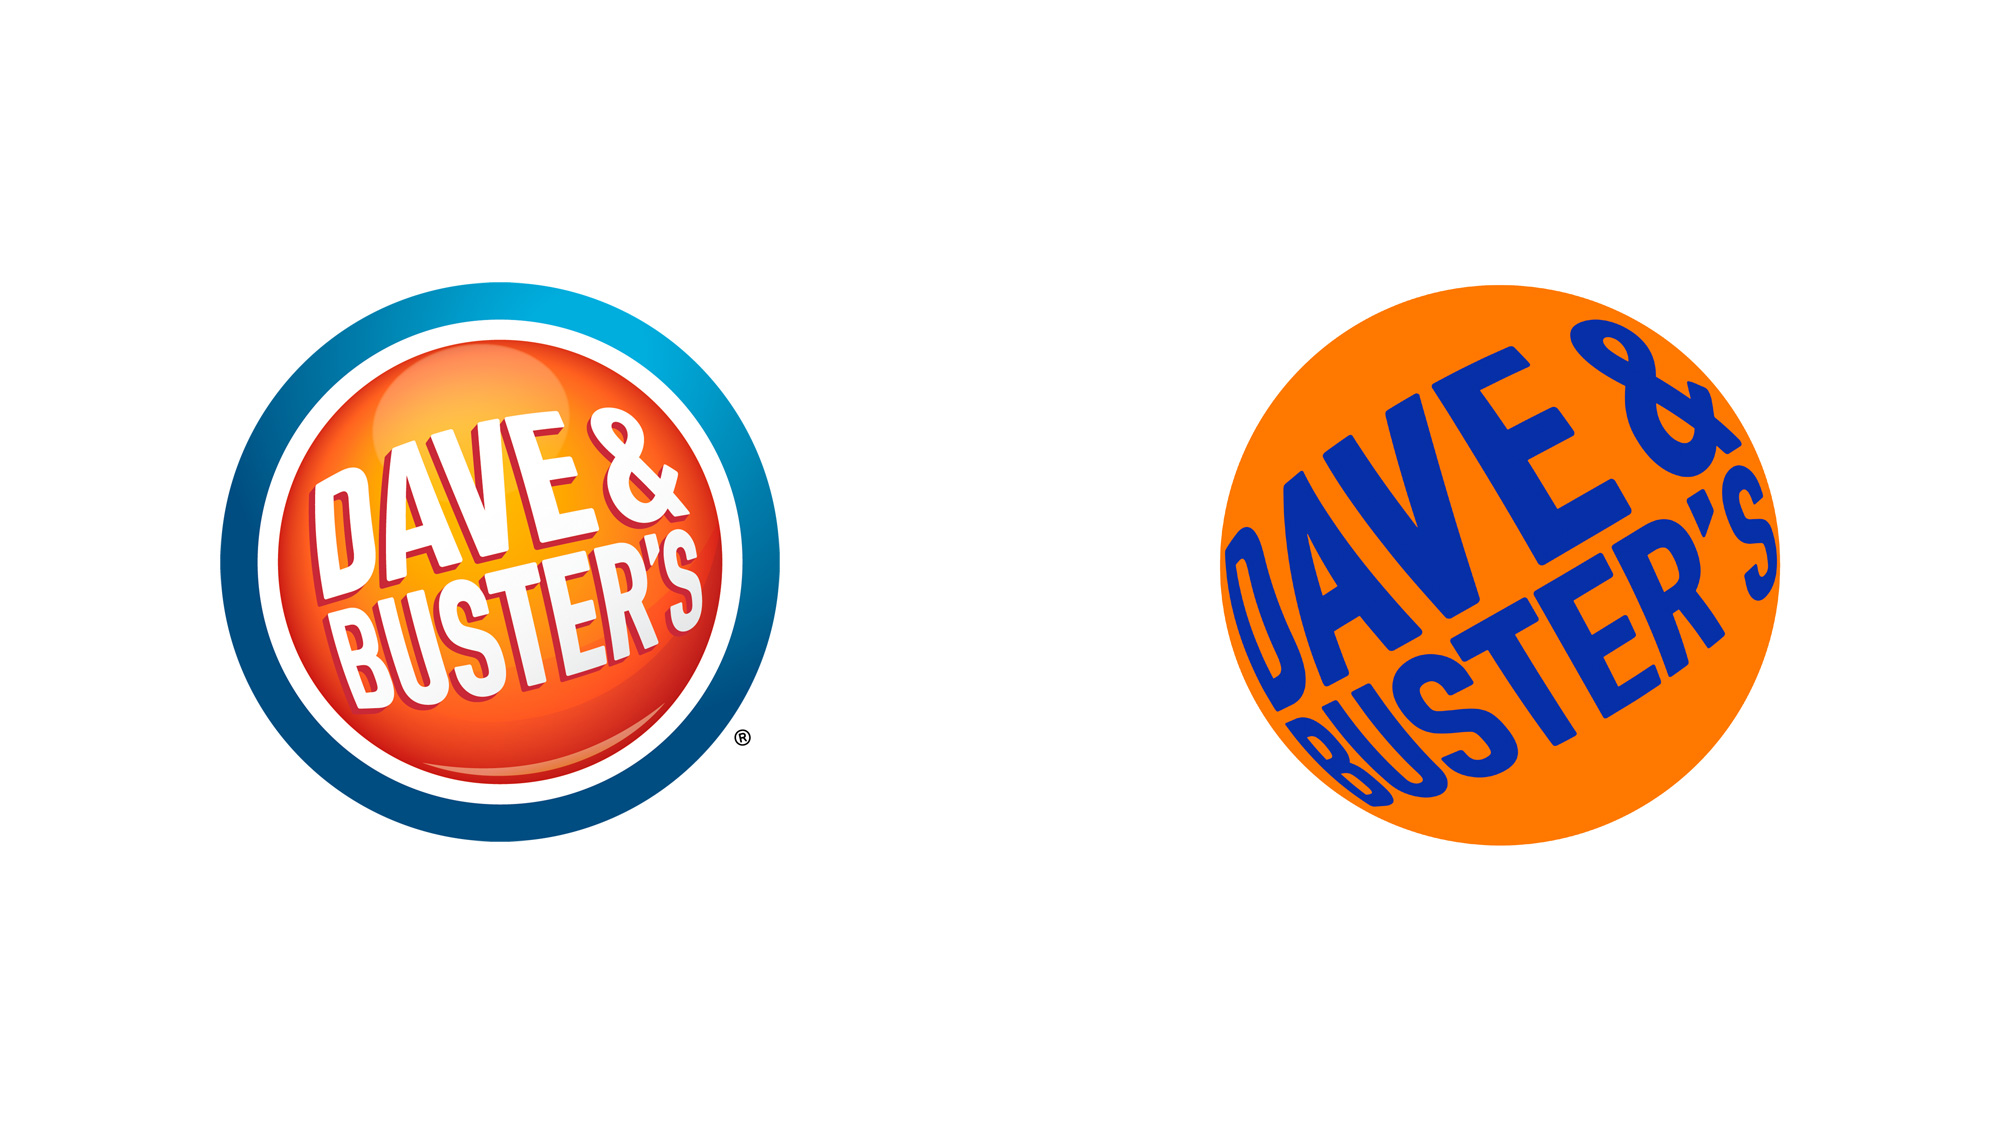 Brand New: New Logo and Identity for Dave & Buster’s by Mother Design